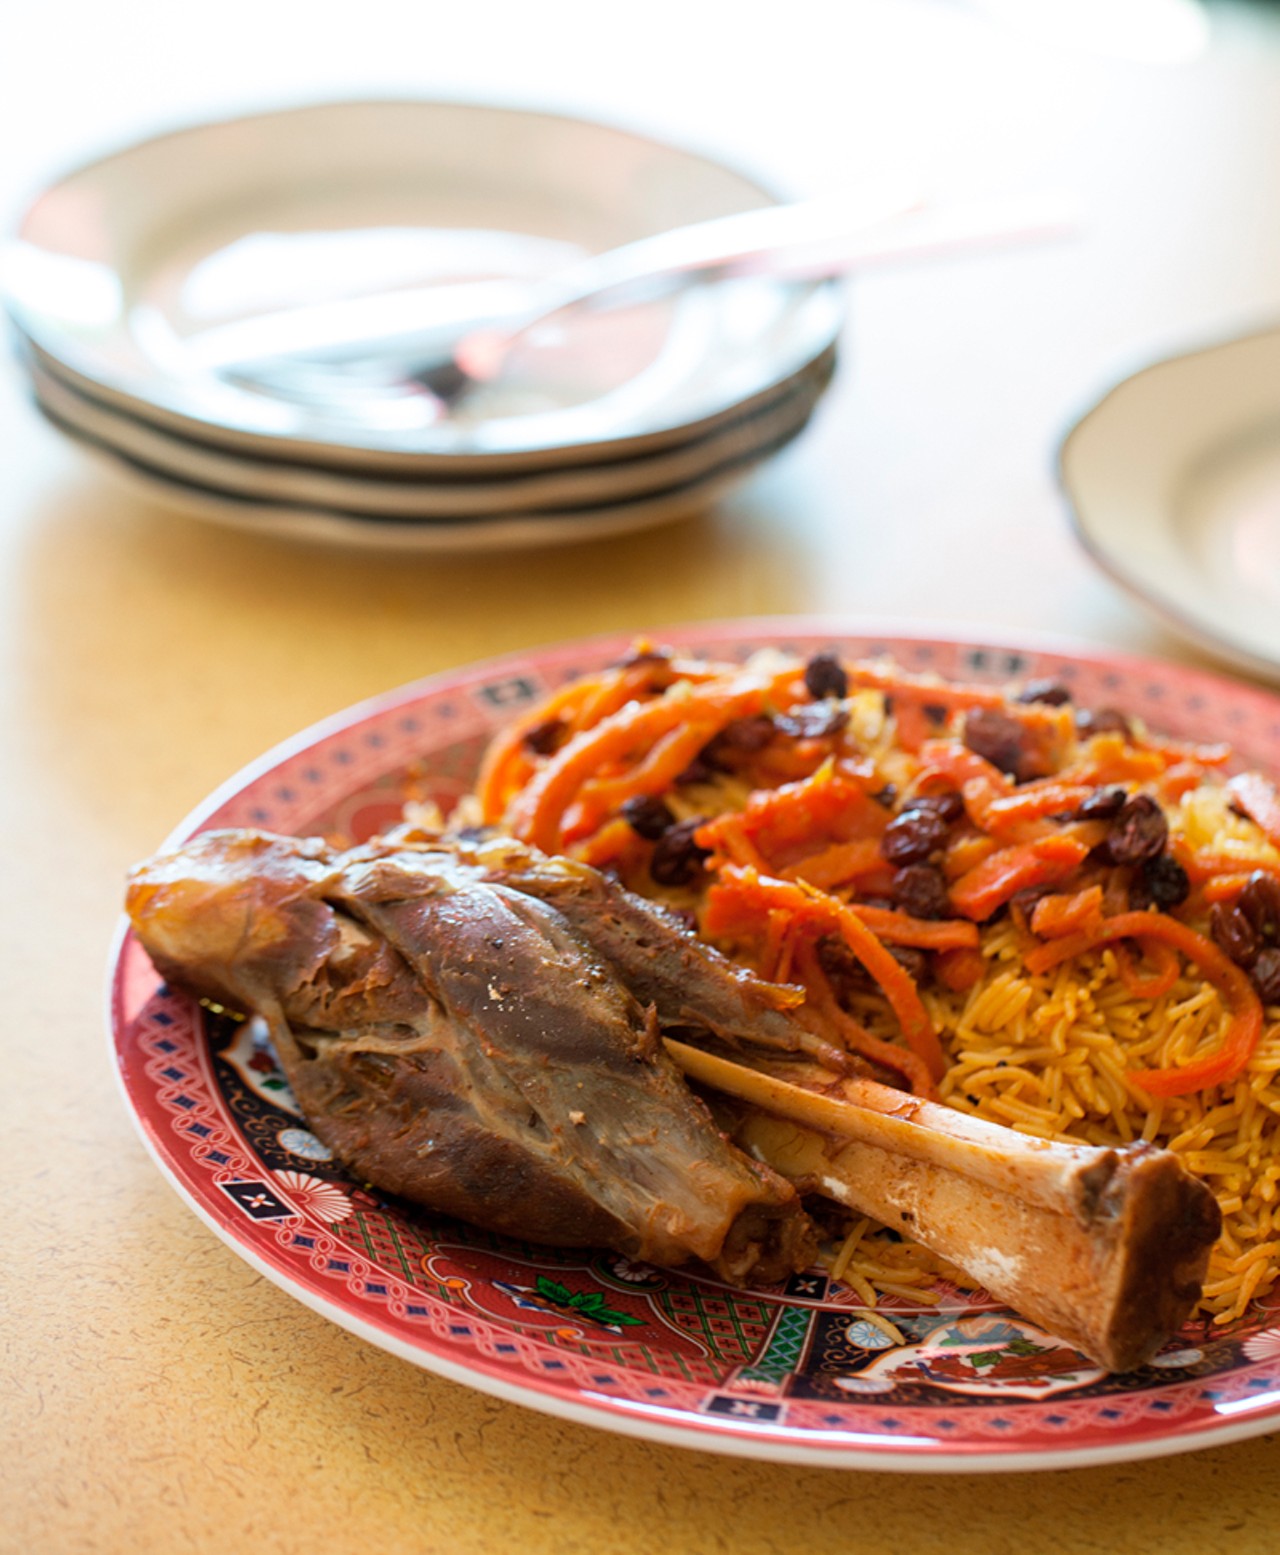 Lamb Qabelli is lamb shank with basmati rice with carrot and raisin, a single serving.